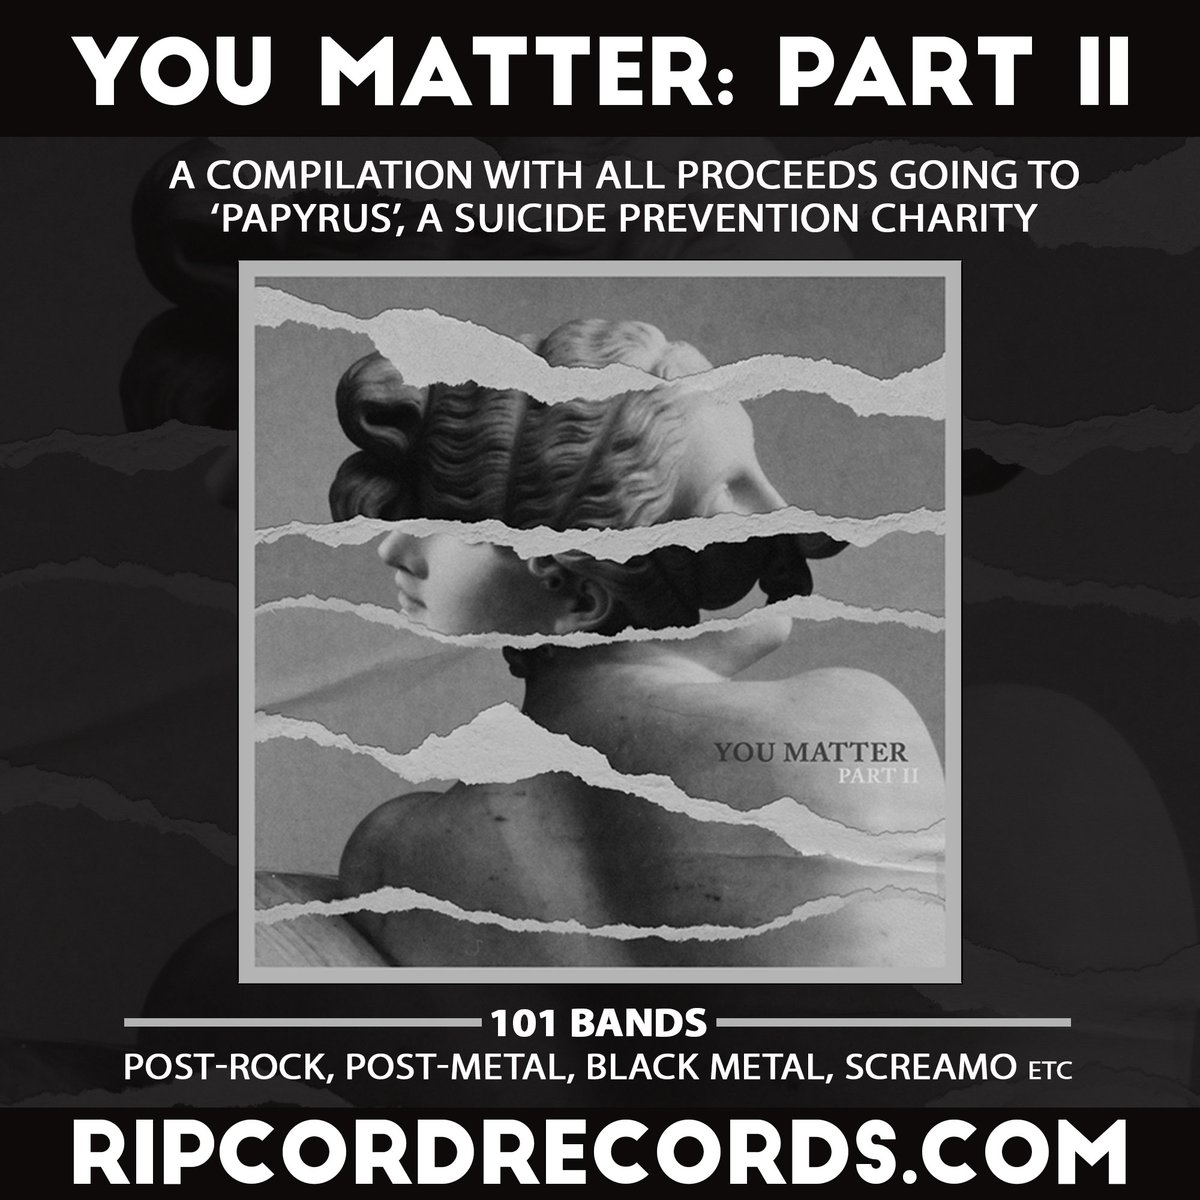 We released this yesterday! YOU MATTER: PART II. 11 hours of music from 101 bands from 22 countries across 4 continents. All money goes to the suicide prevention charity PAPYRUS. ripcordrecords.bandcamp.com/album/you-matt…